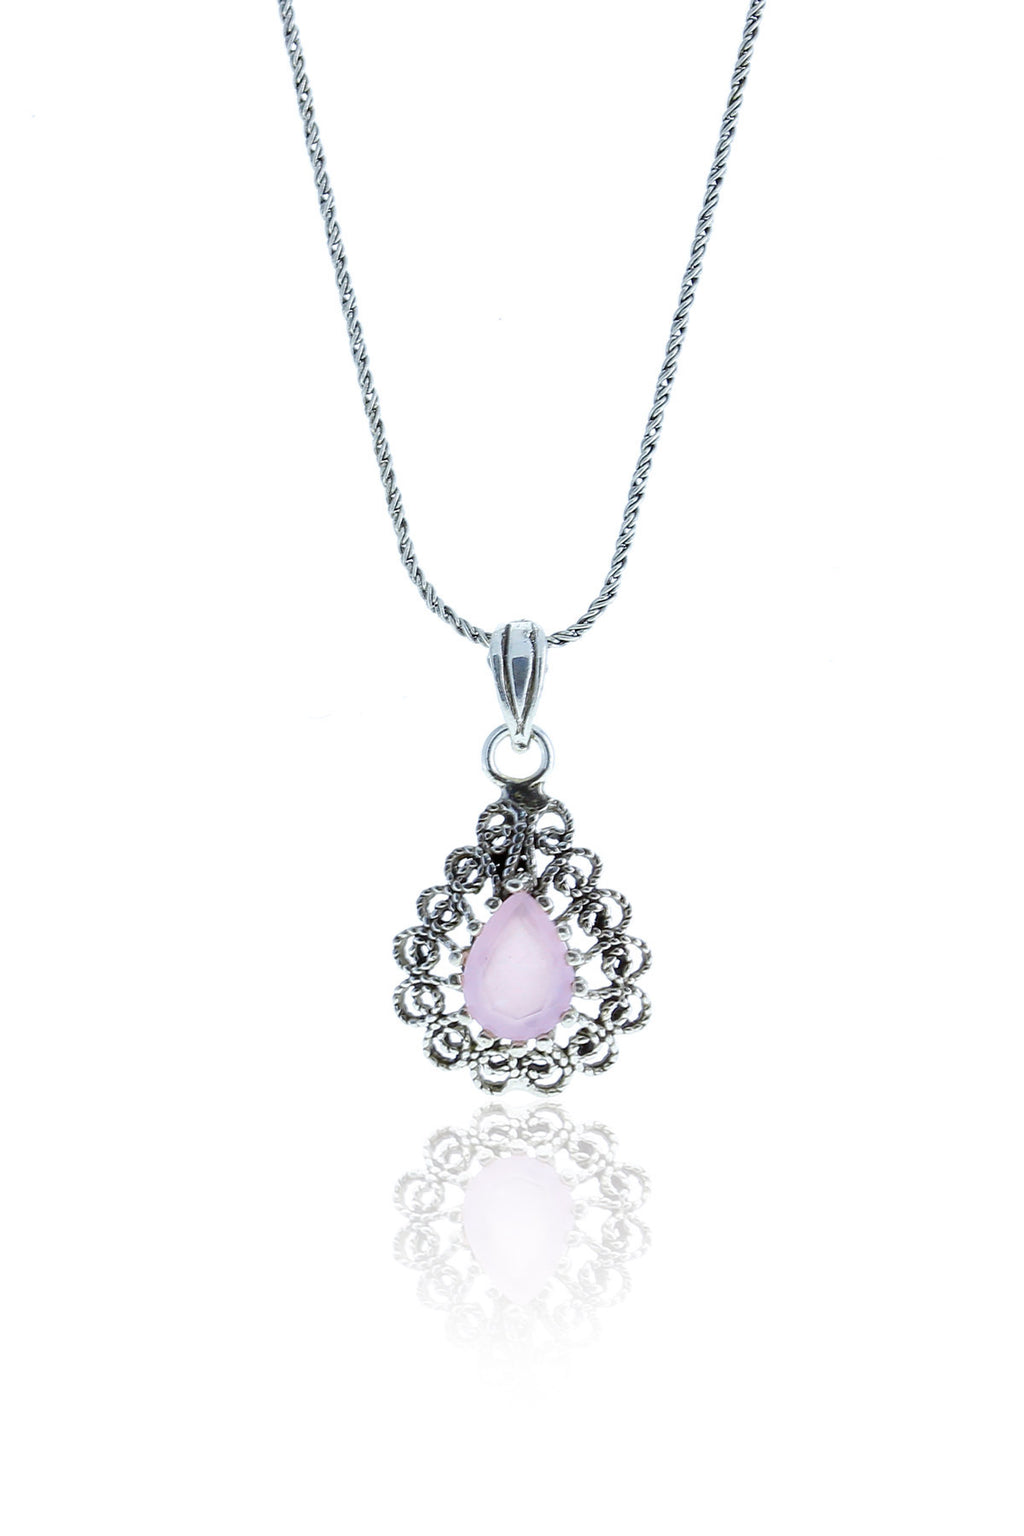 Drop Model Authentic Filigree Silver Necklace With Quartz (NG201017535)